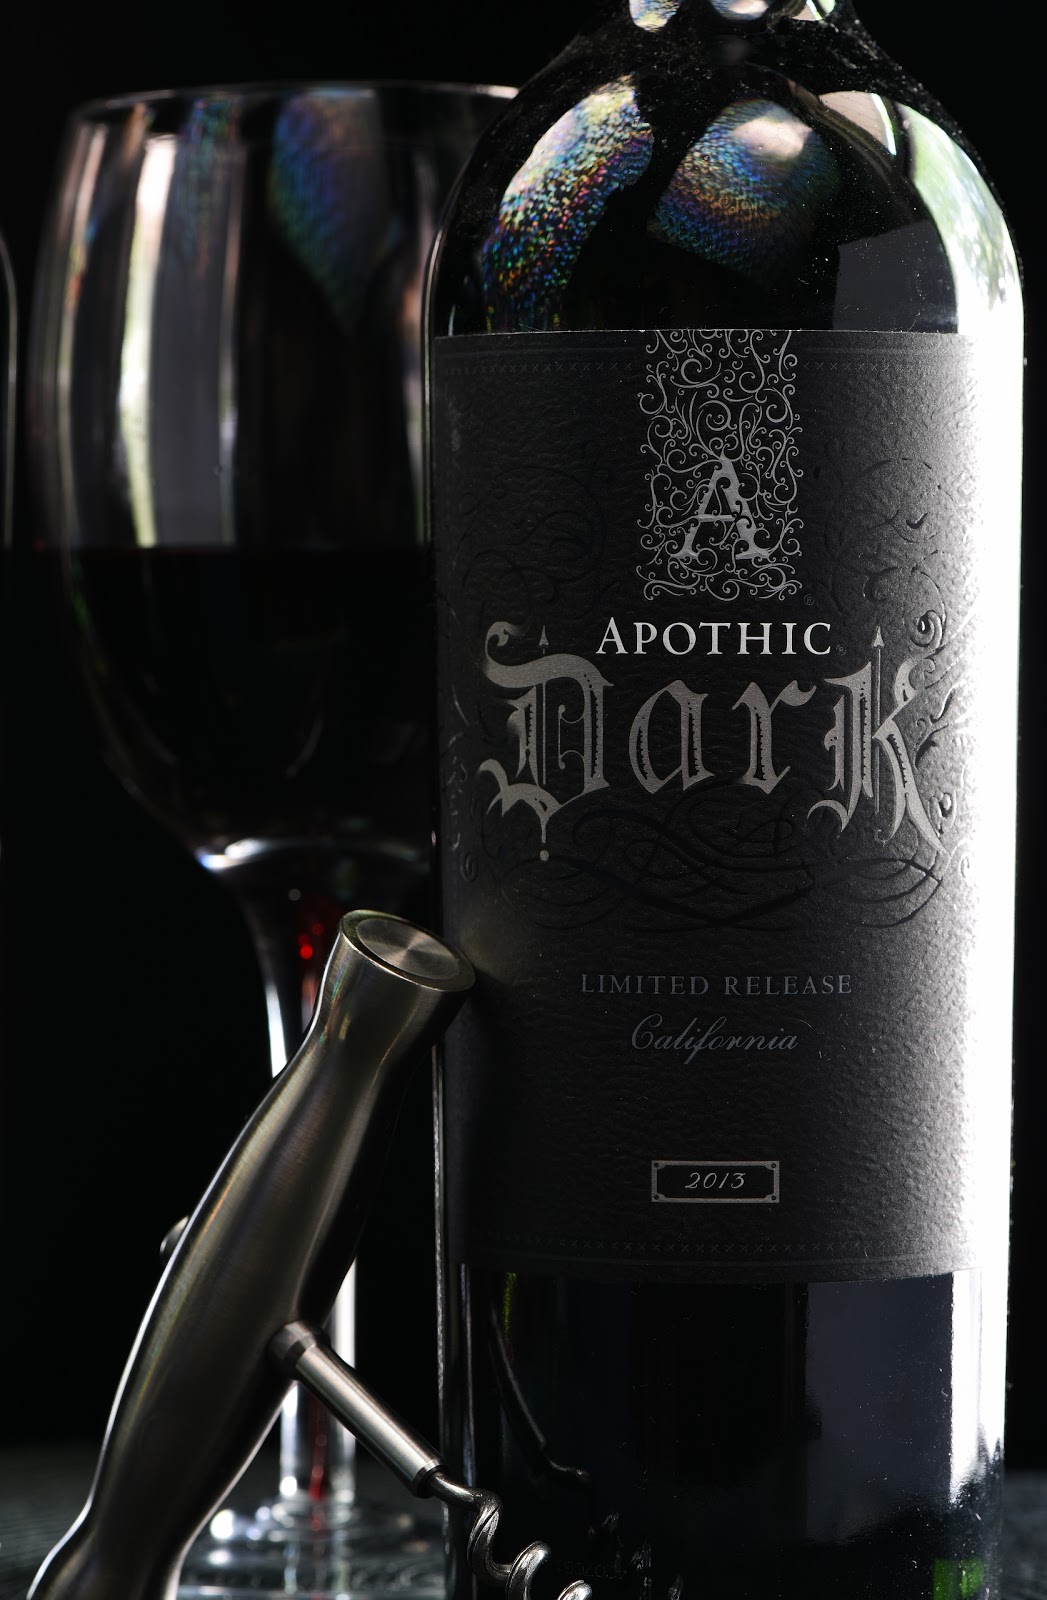 new-hampshire-wine-man-apothic-dark-limited-release-2013-red-wine